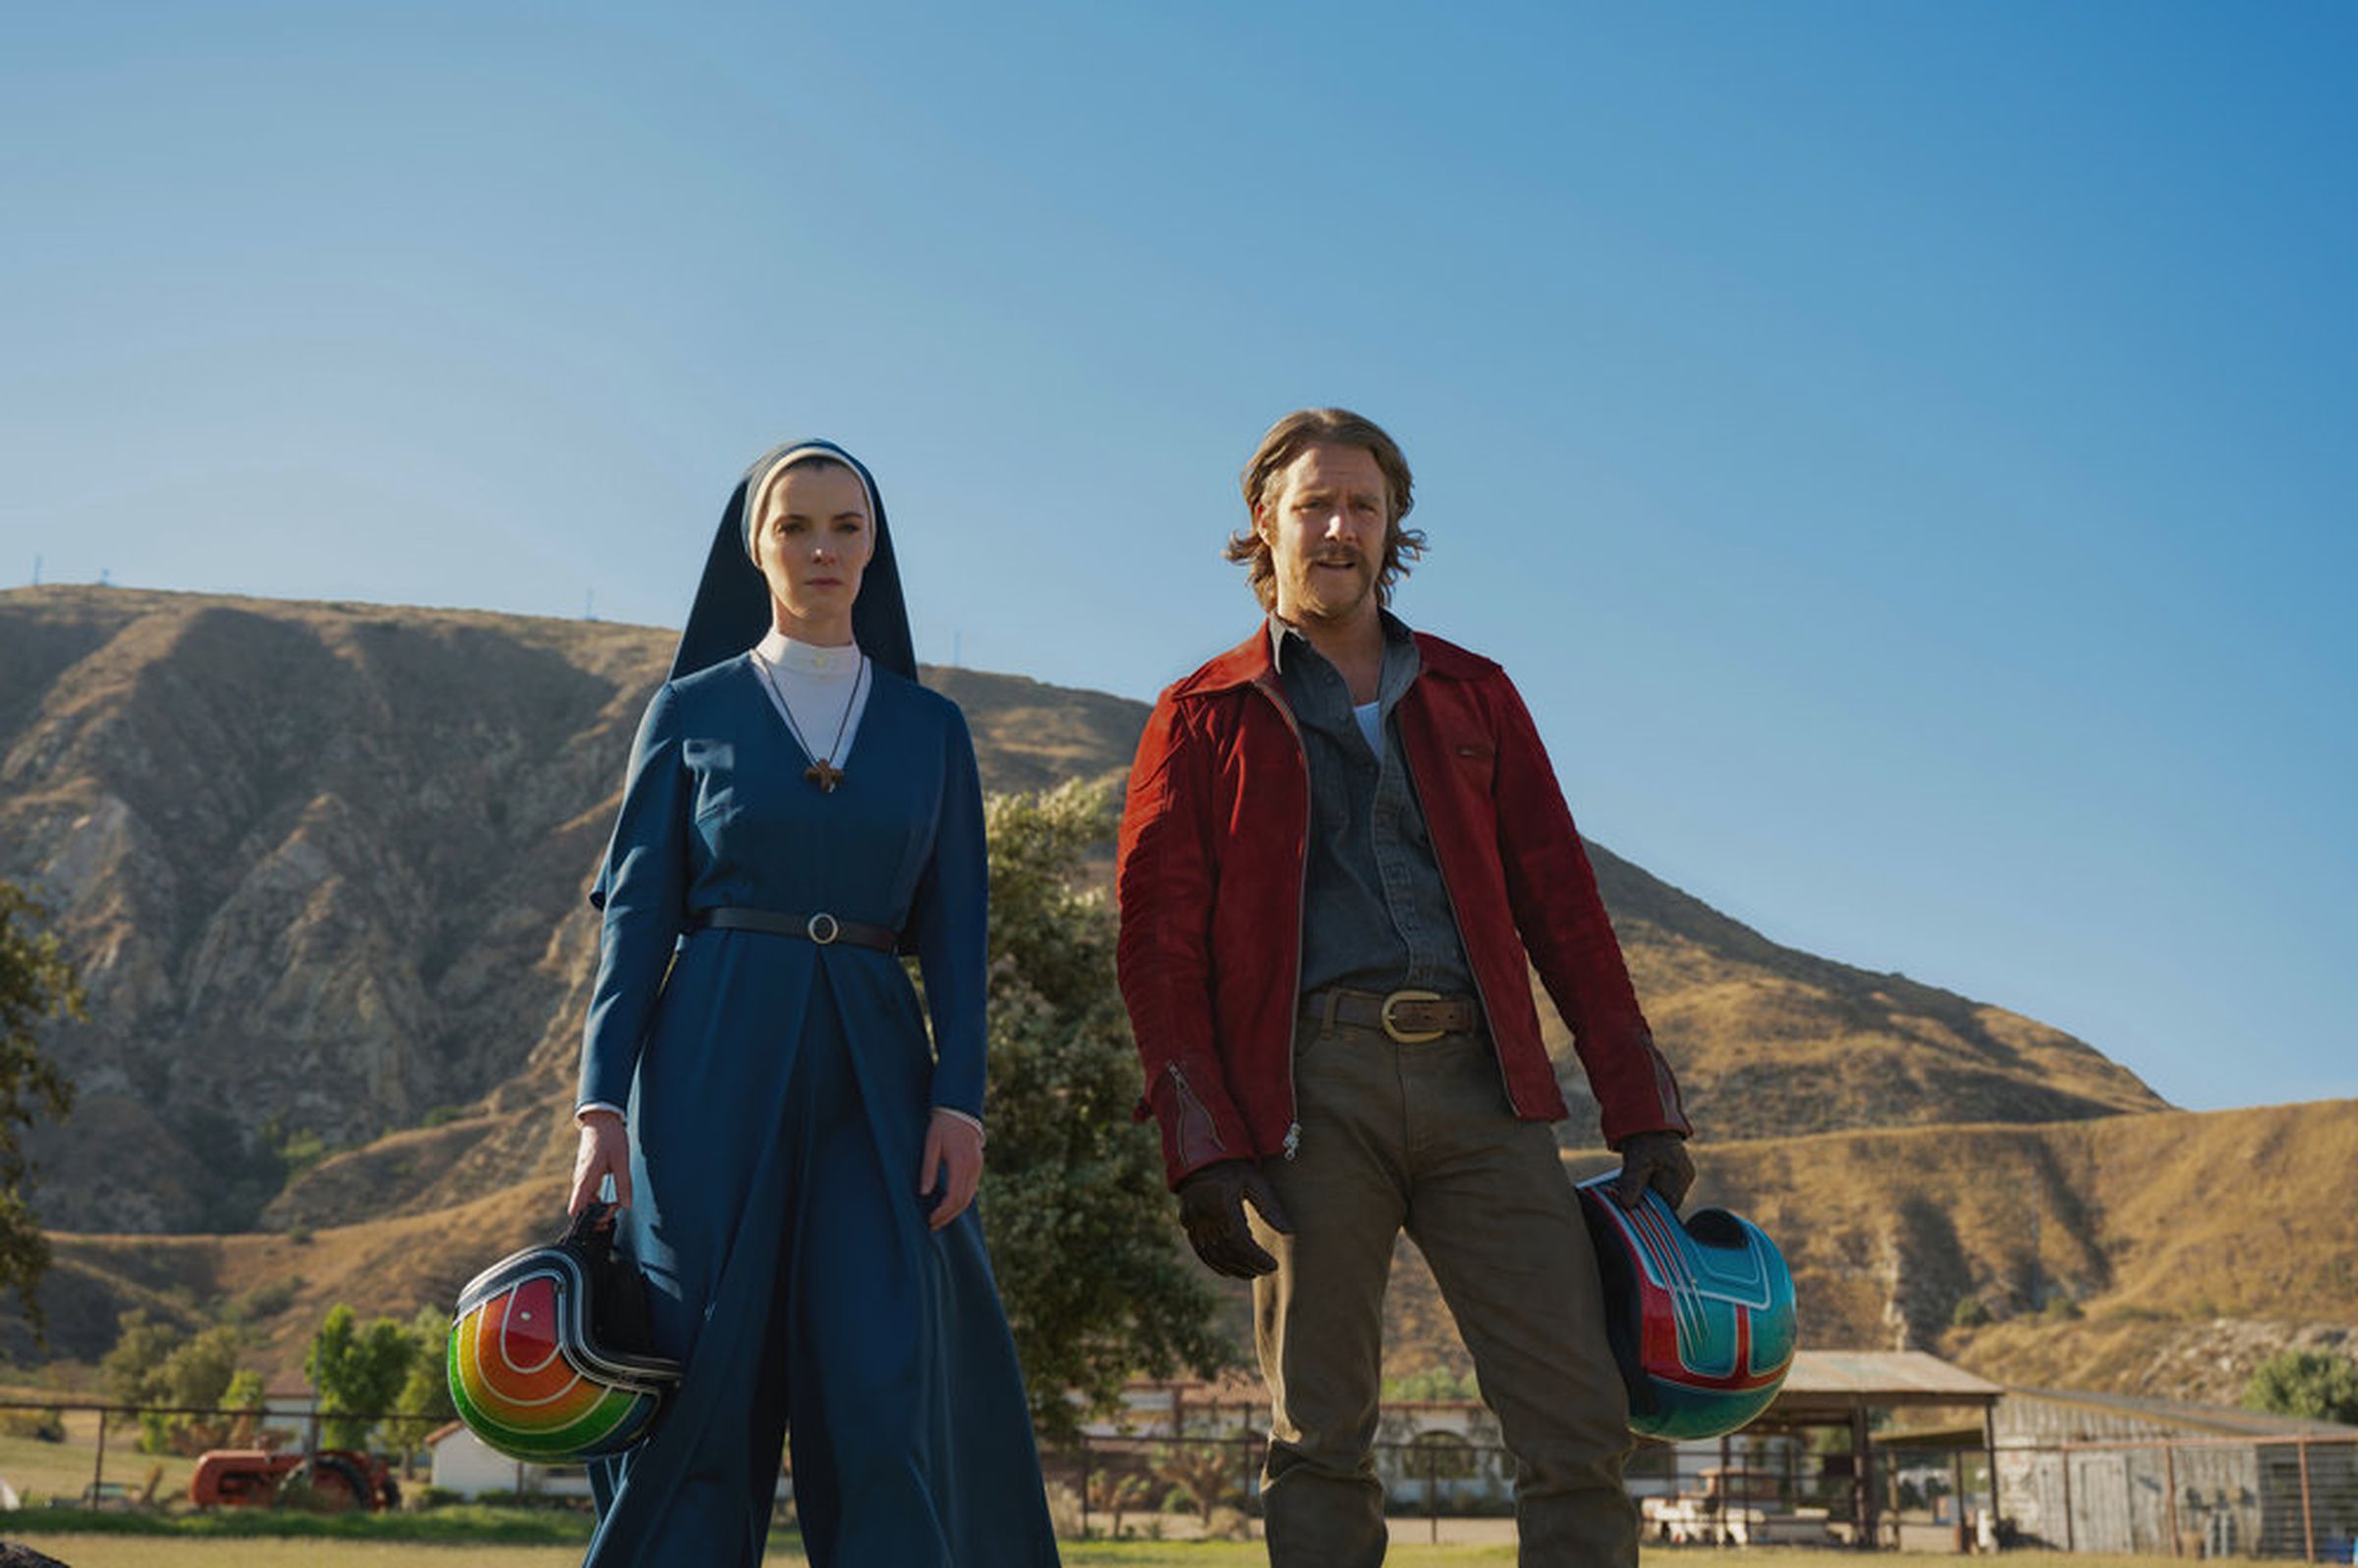 A white woman dressed as a nun and a white man with blond hair and a mustache, stare at something in concern. They both hold colorful motorcycle helmets.